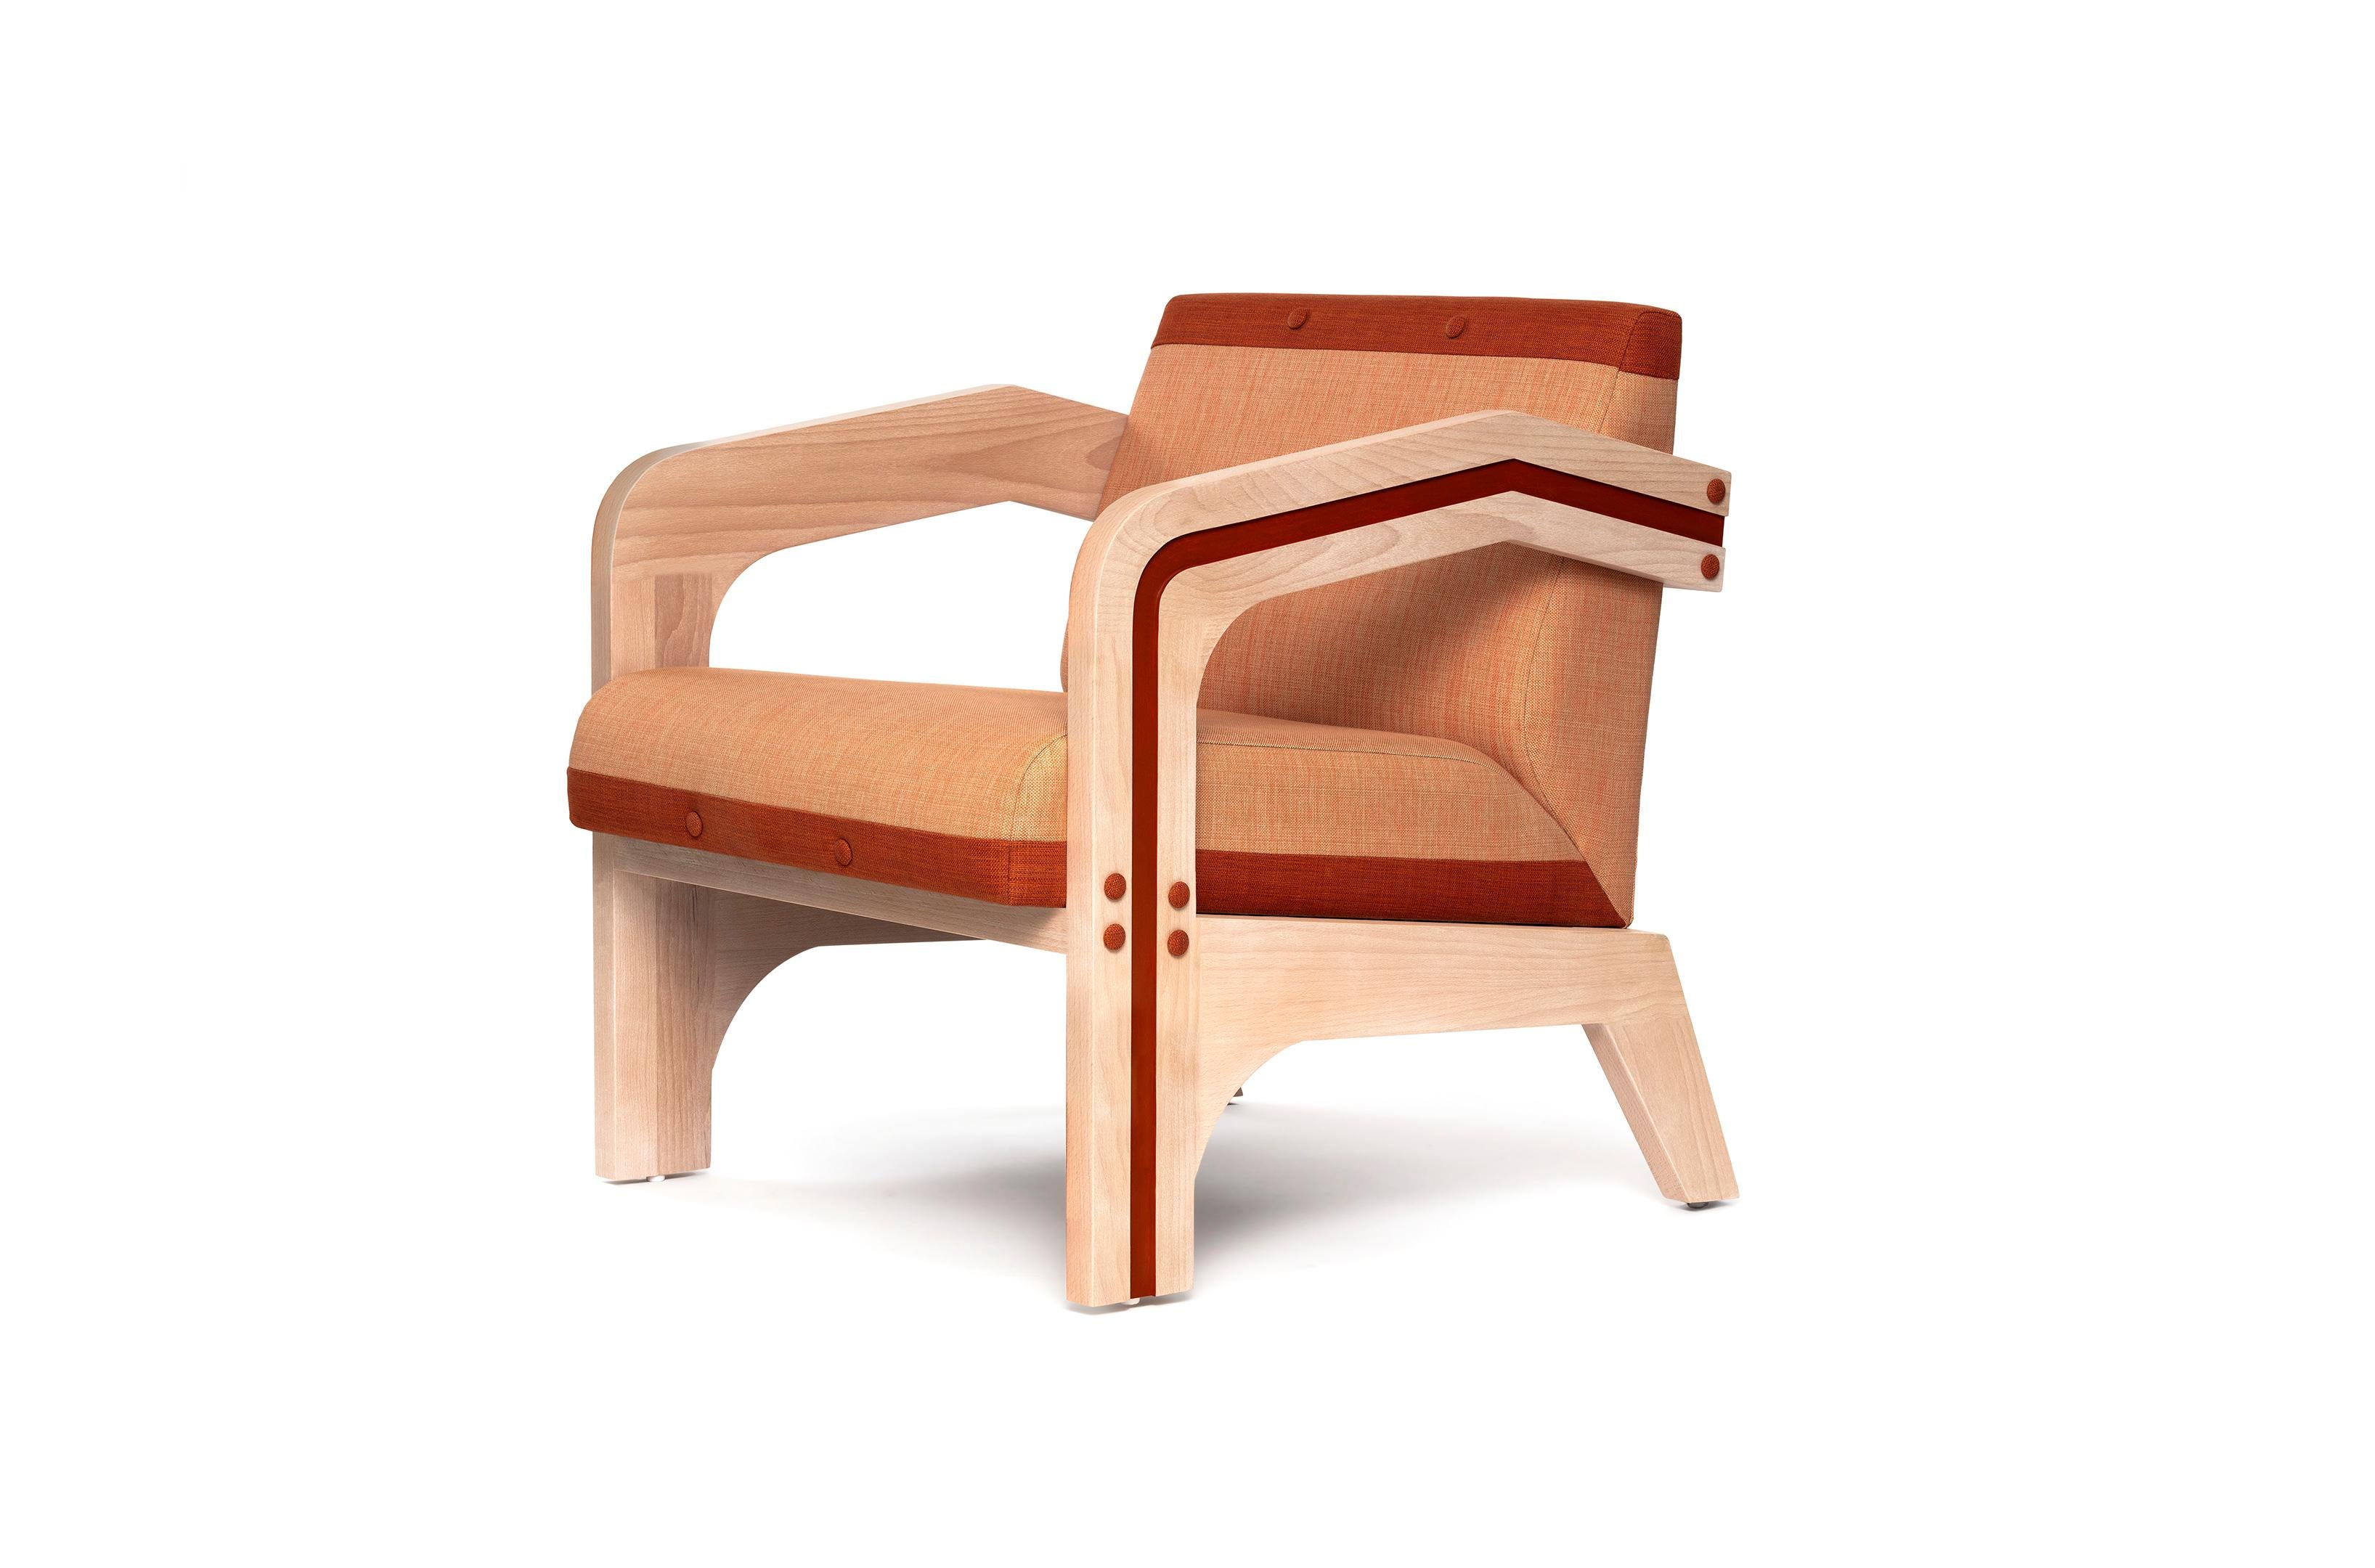 Eluney lounge chair is made of solid wood, we use FCS certified wood, which provide not only high durability, but fair wages and safe work conditions for everyone involved. Beautiful on the outside, beautiful on the inside. Also customizable for